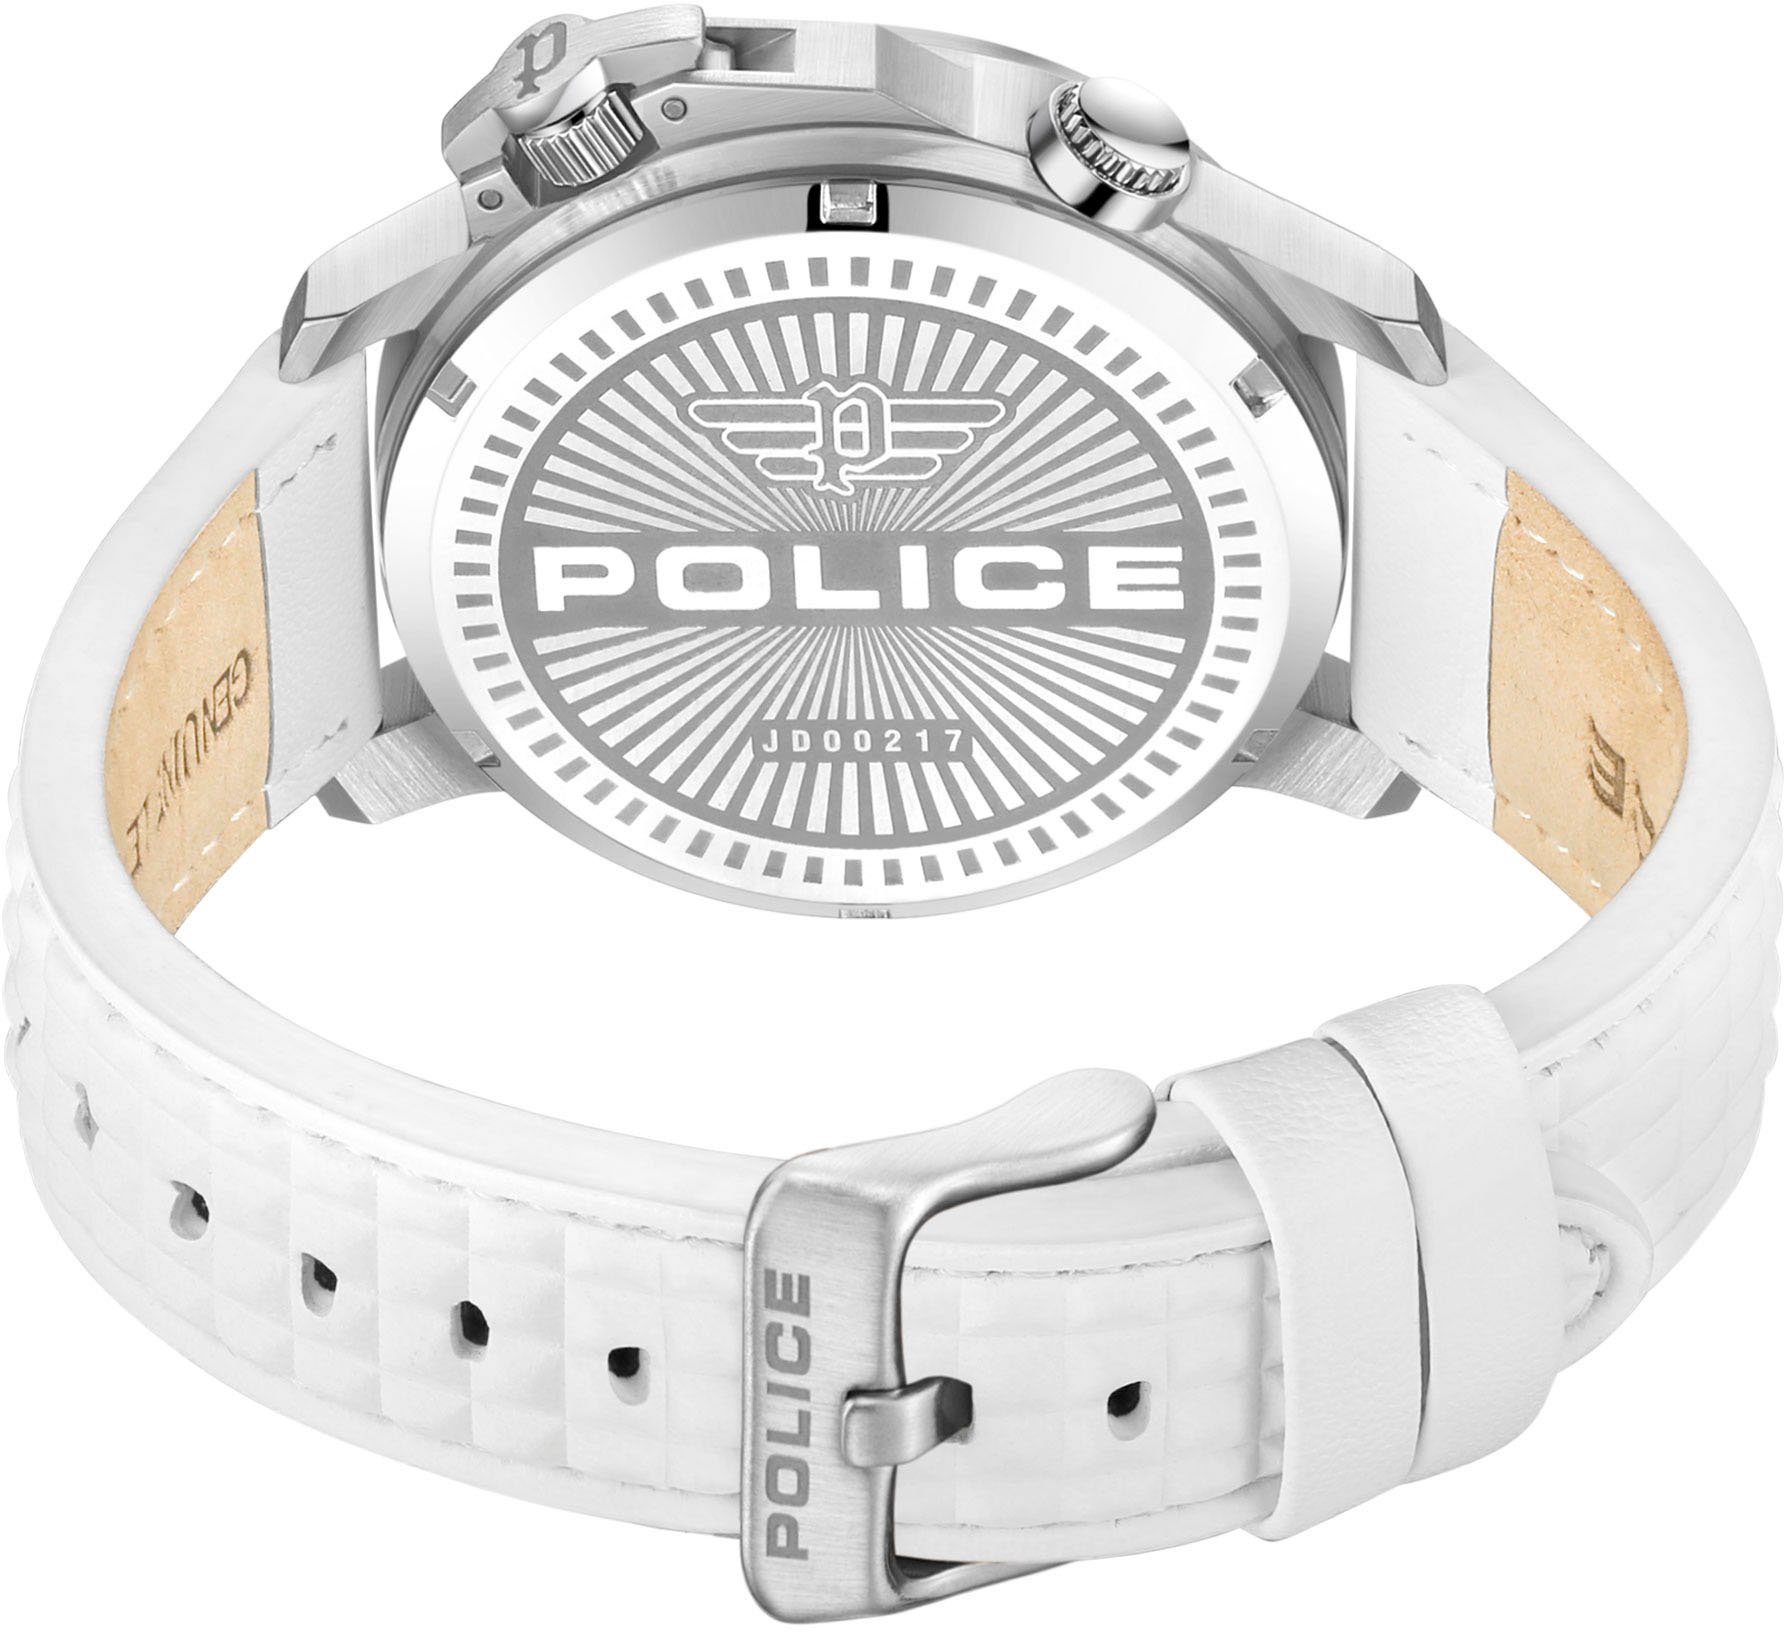 AUTOMATED, Automatikuhr PEWJD0021704 Police Weiss